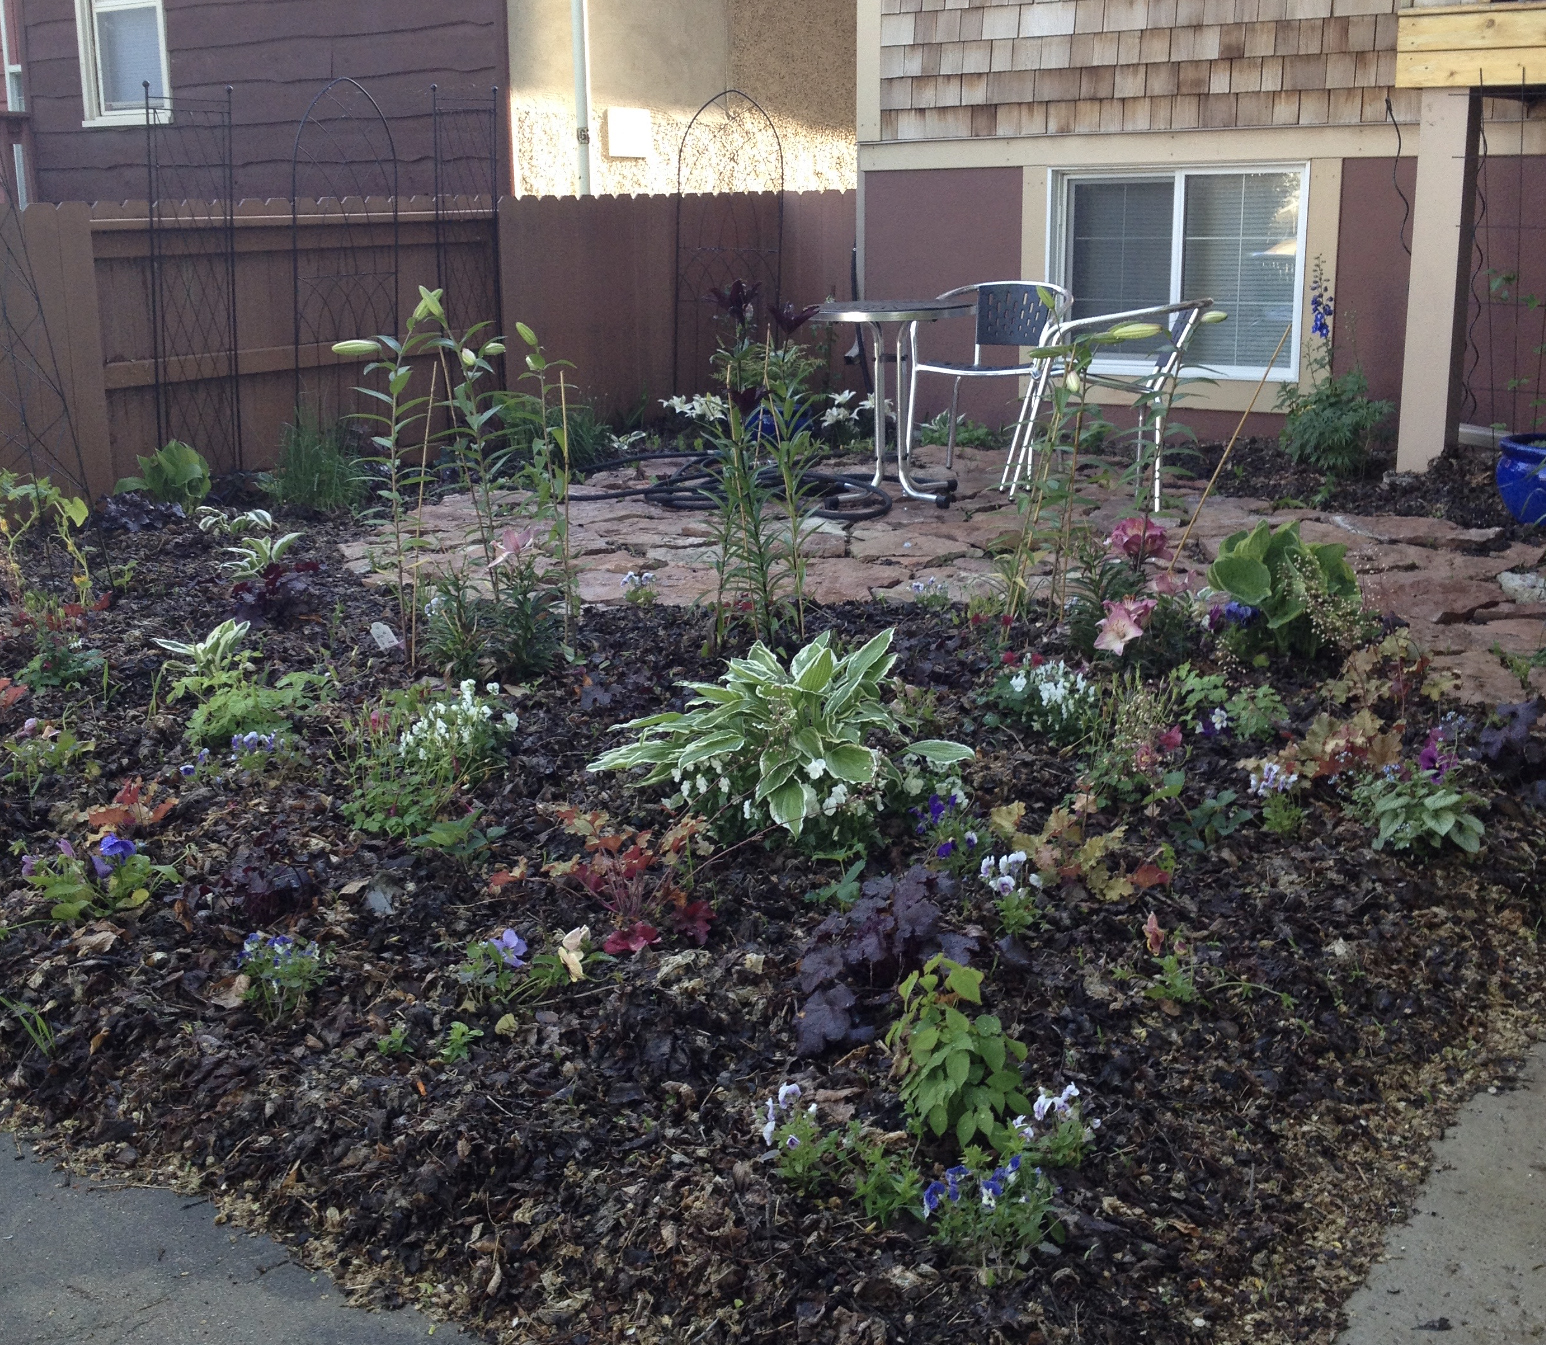 A mulched flower bed divides out a landscaped seating area.